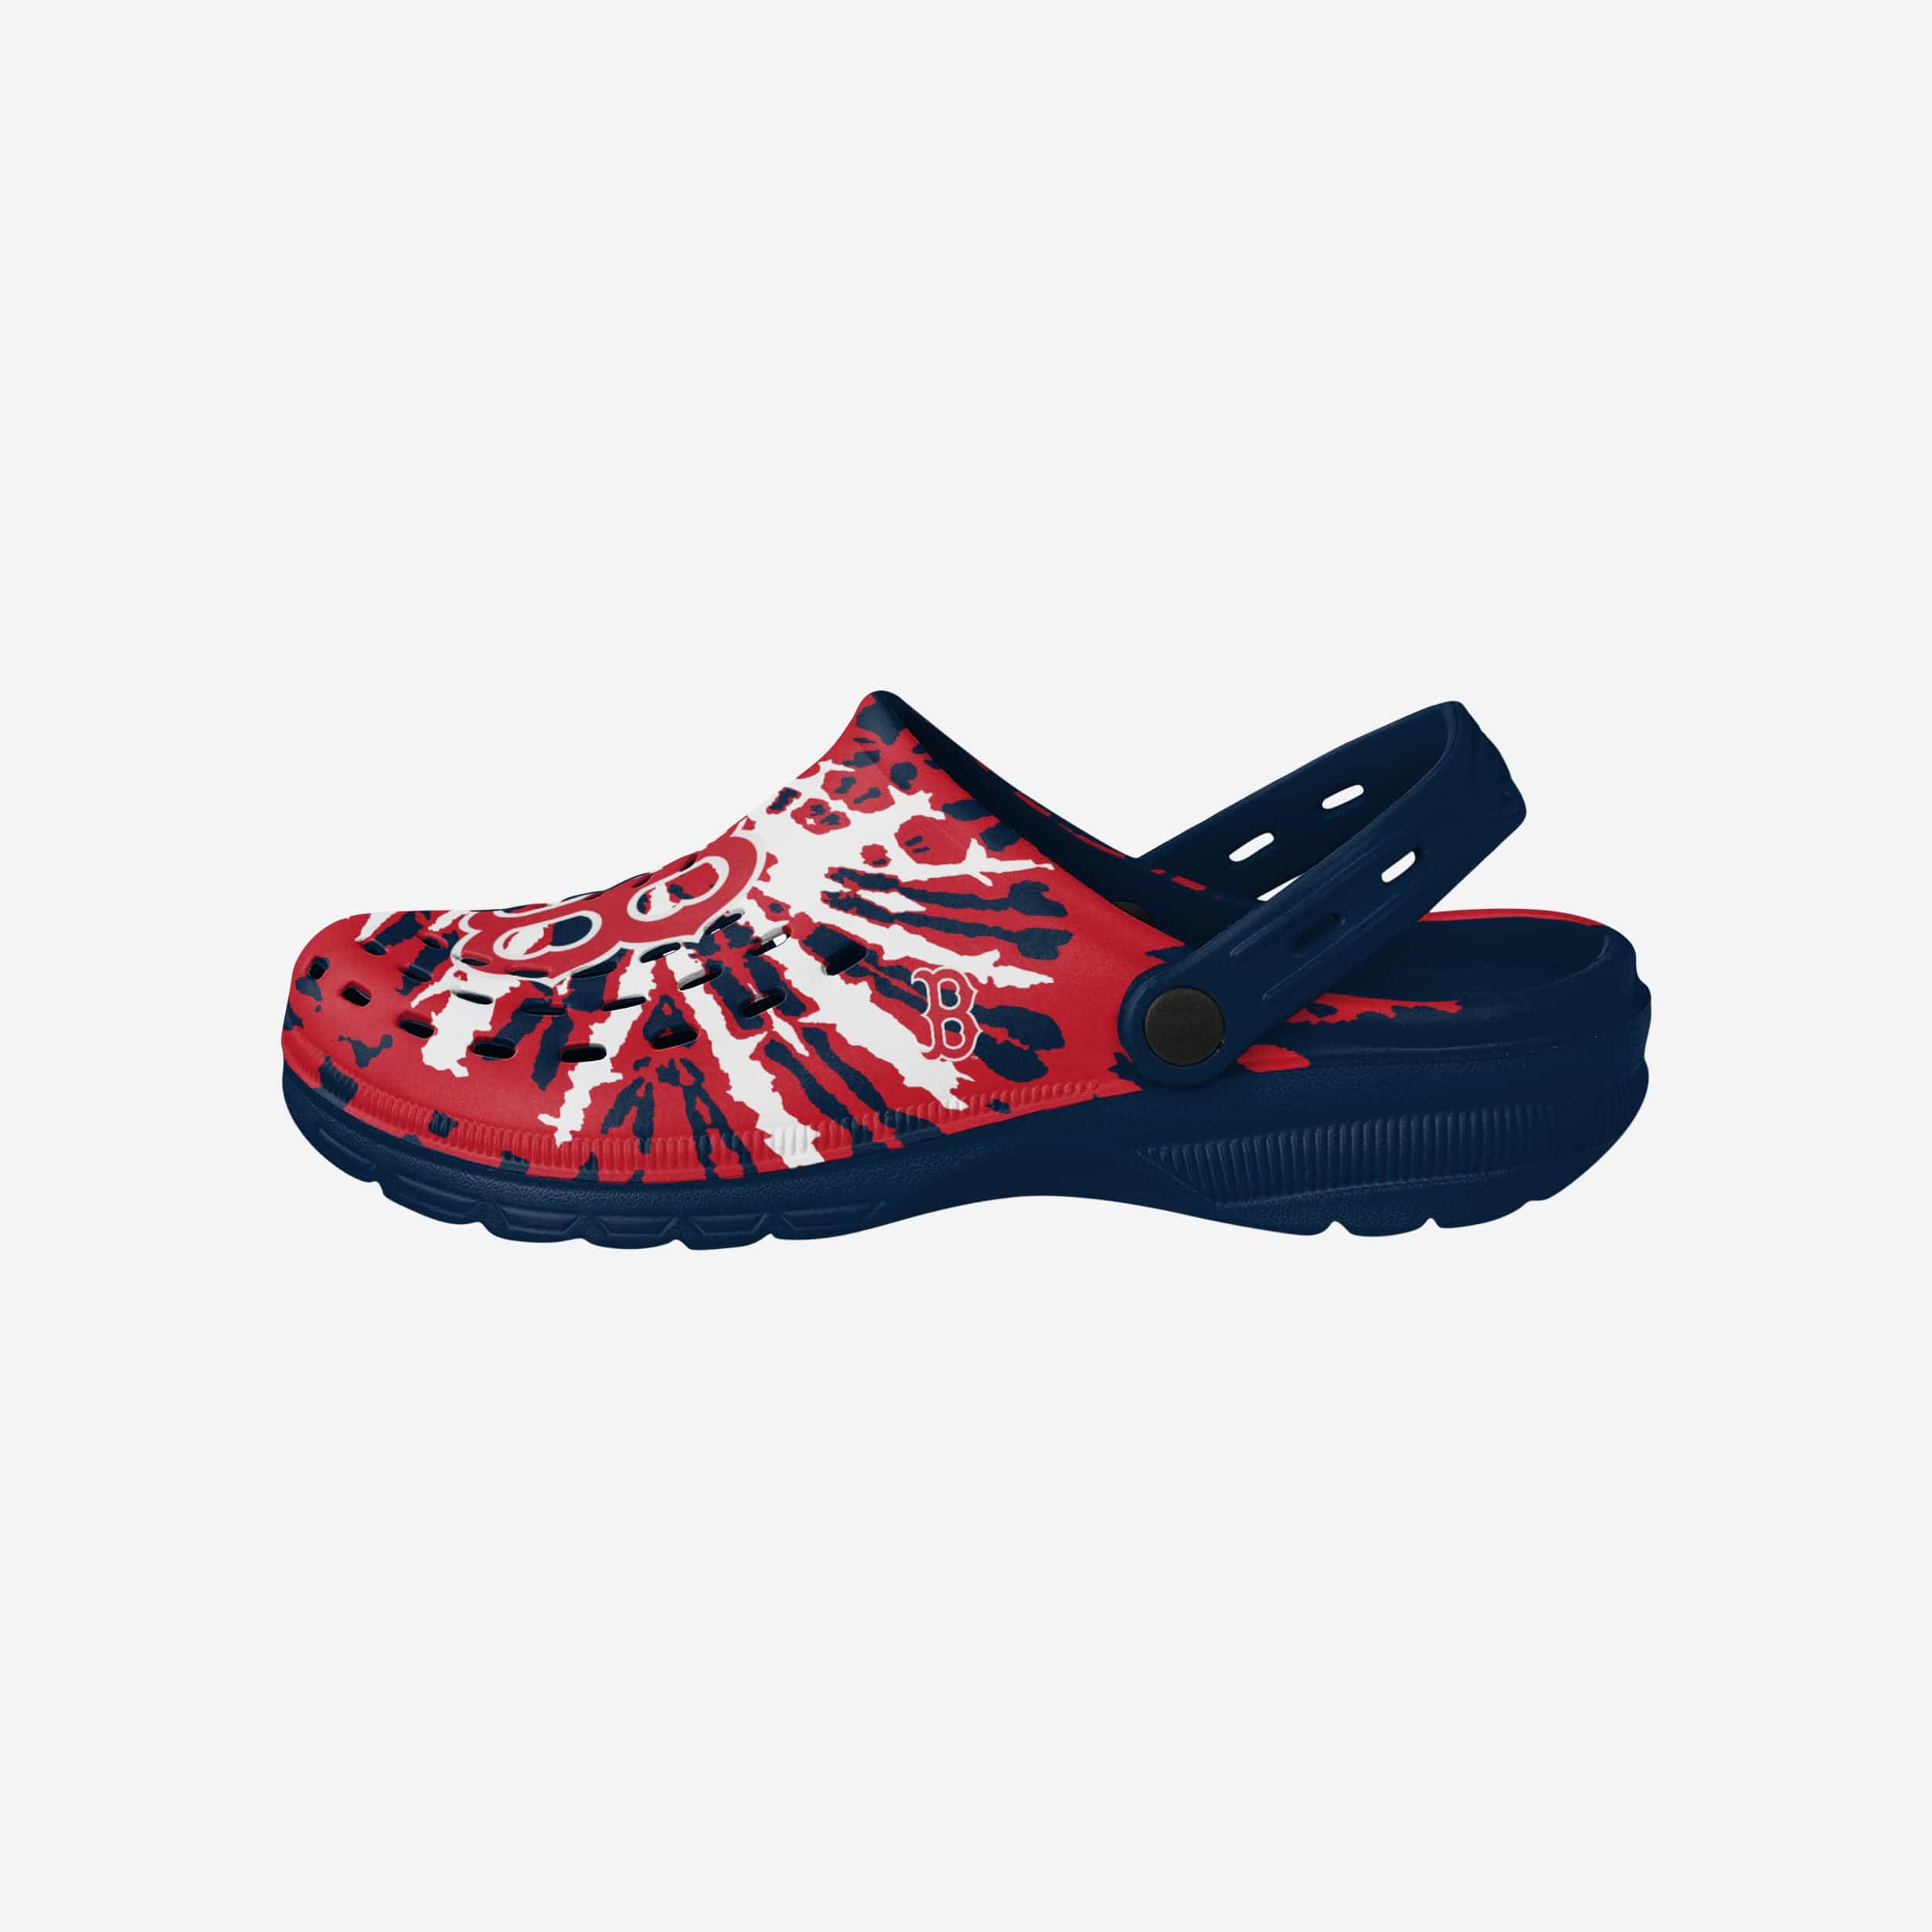 Boston Red Sox Shop Logo Tie Dye Crocs Clog Shoes - A Moments of Choosing  the Best Gifts